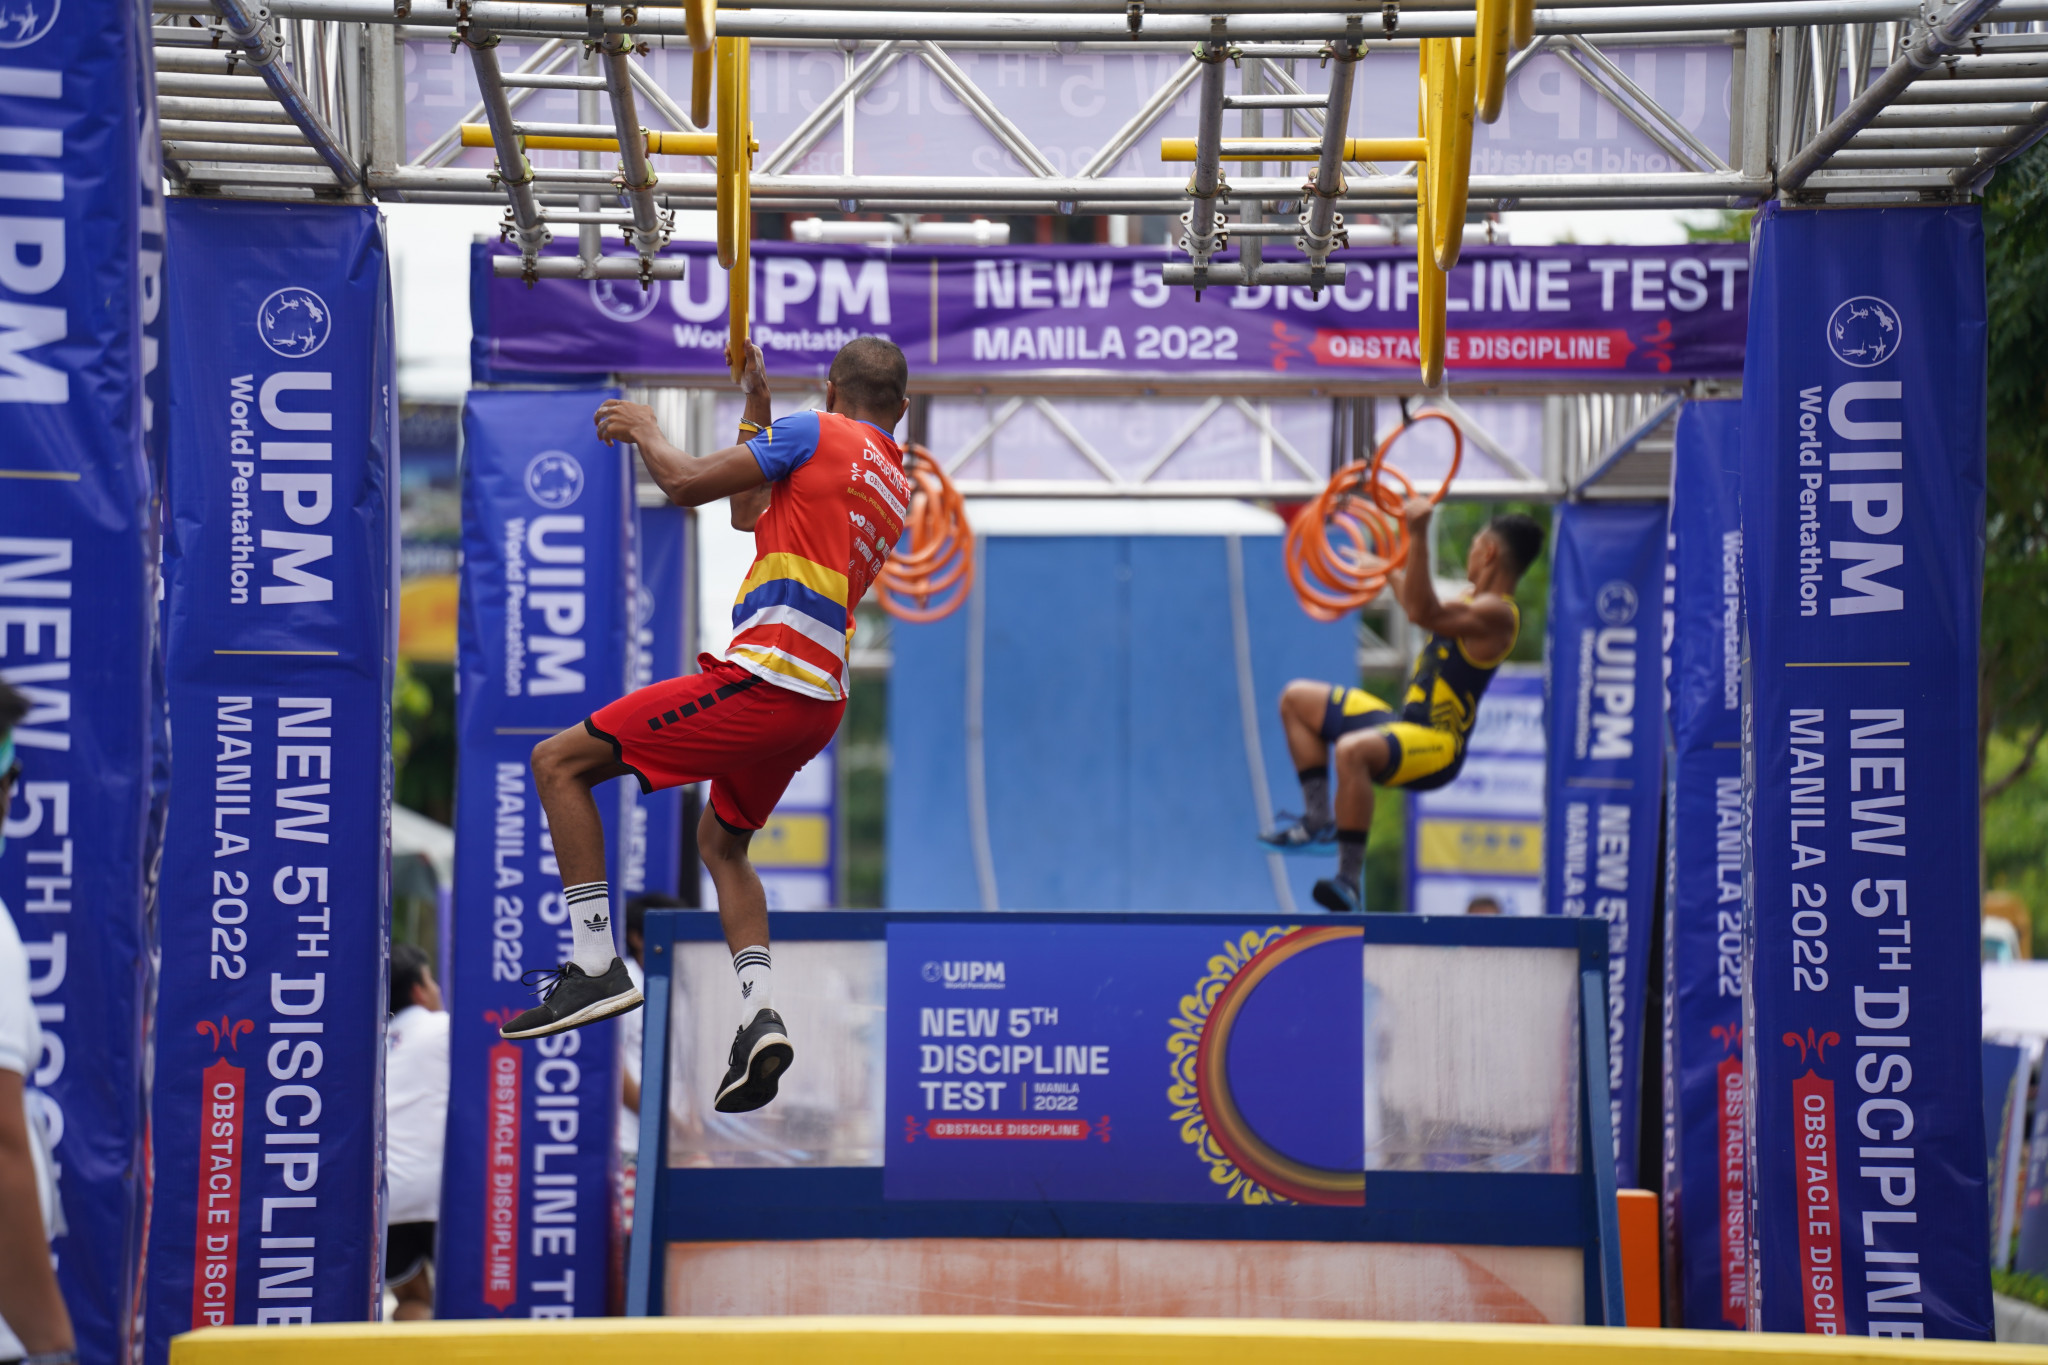 The indoor course in Poland is due to consist of eight obstacles for athletes to tackle ©UIPM